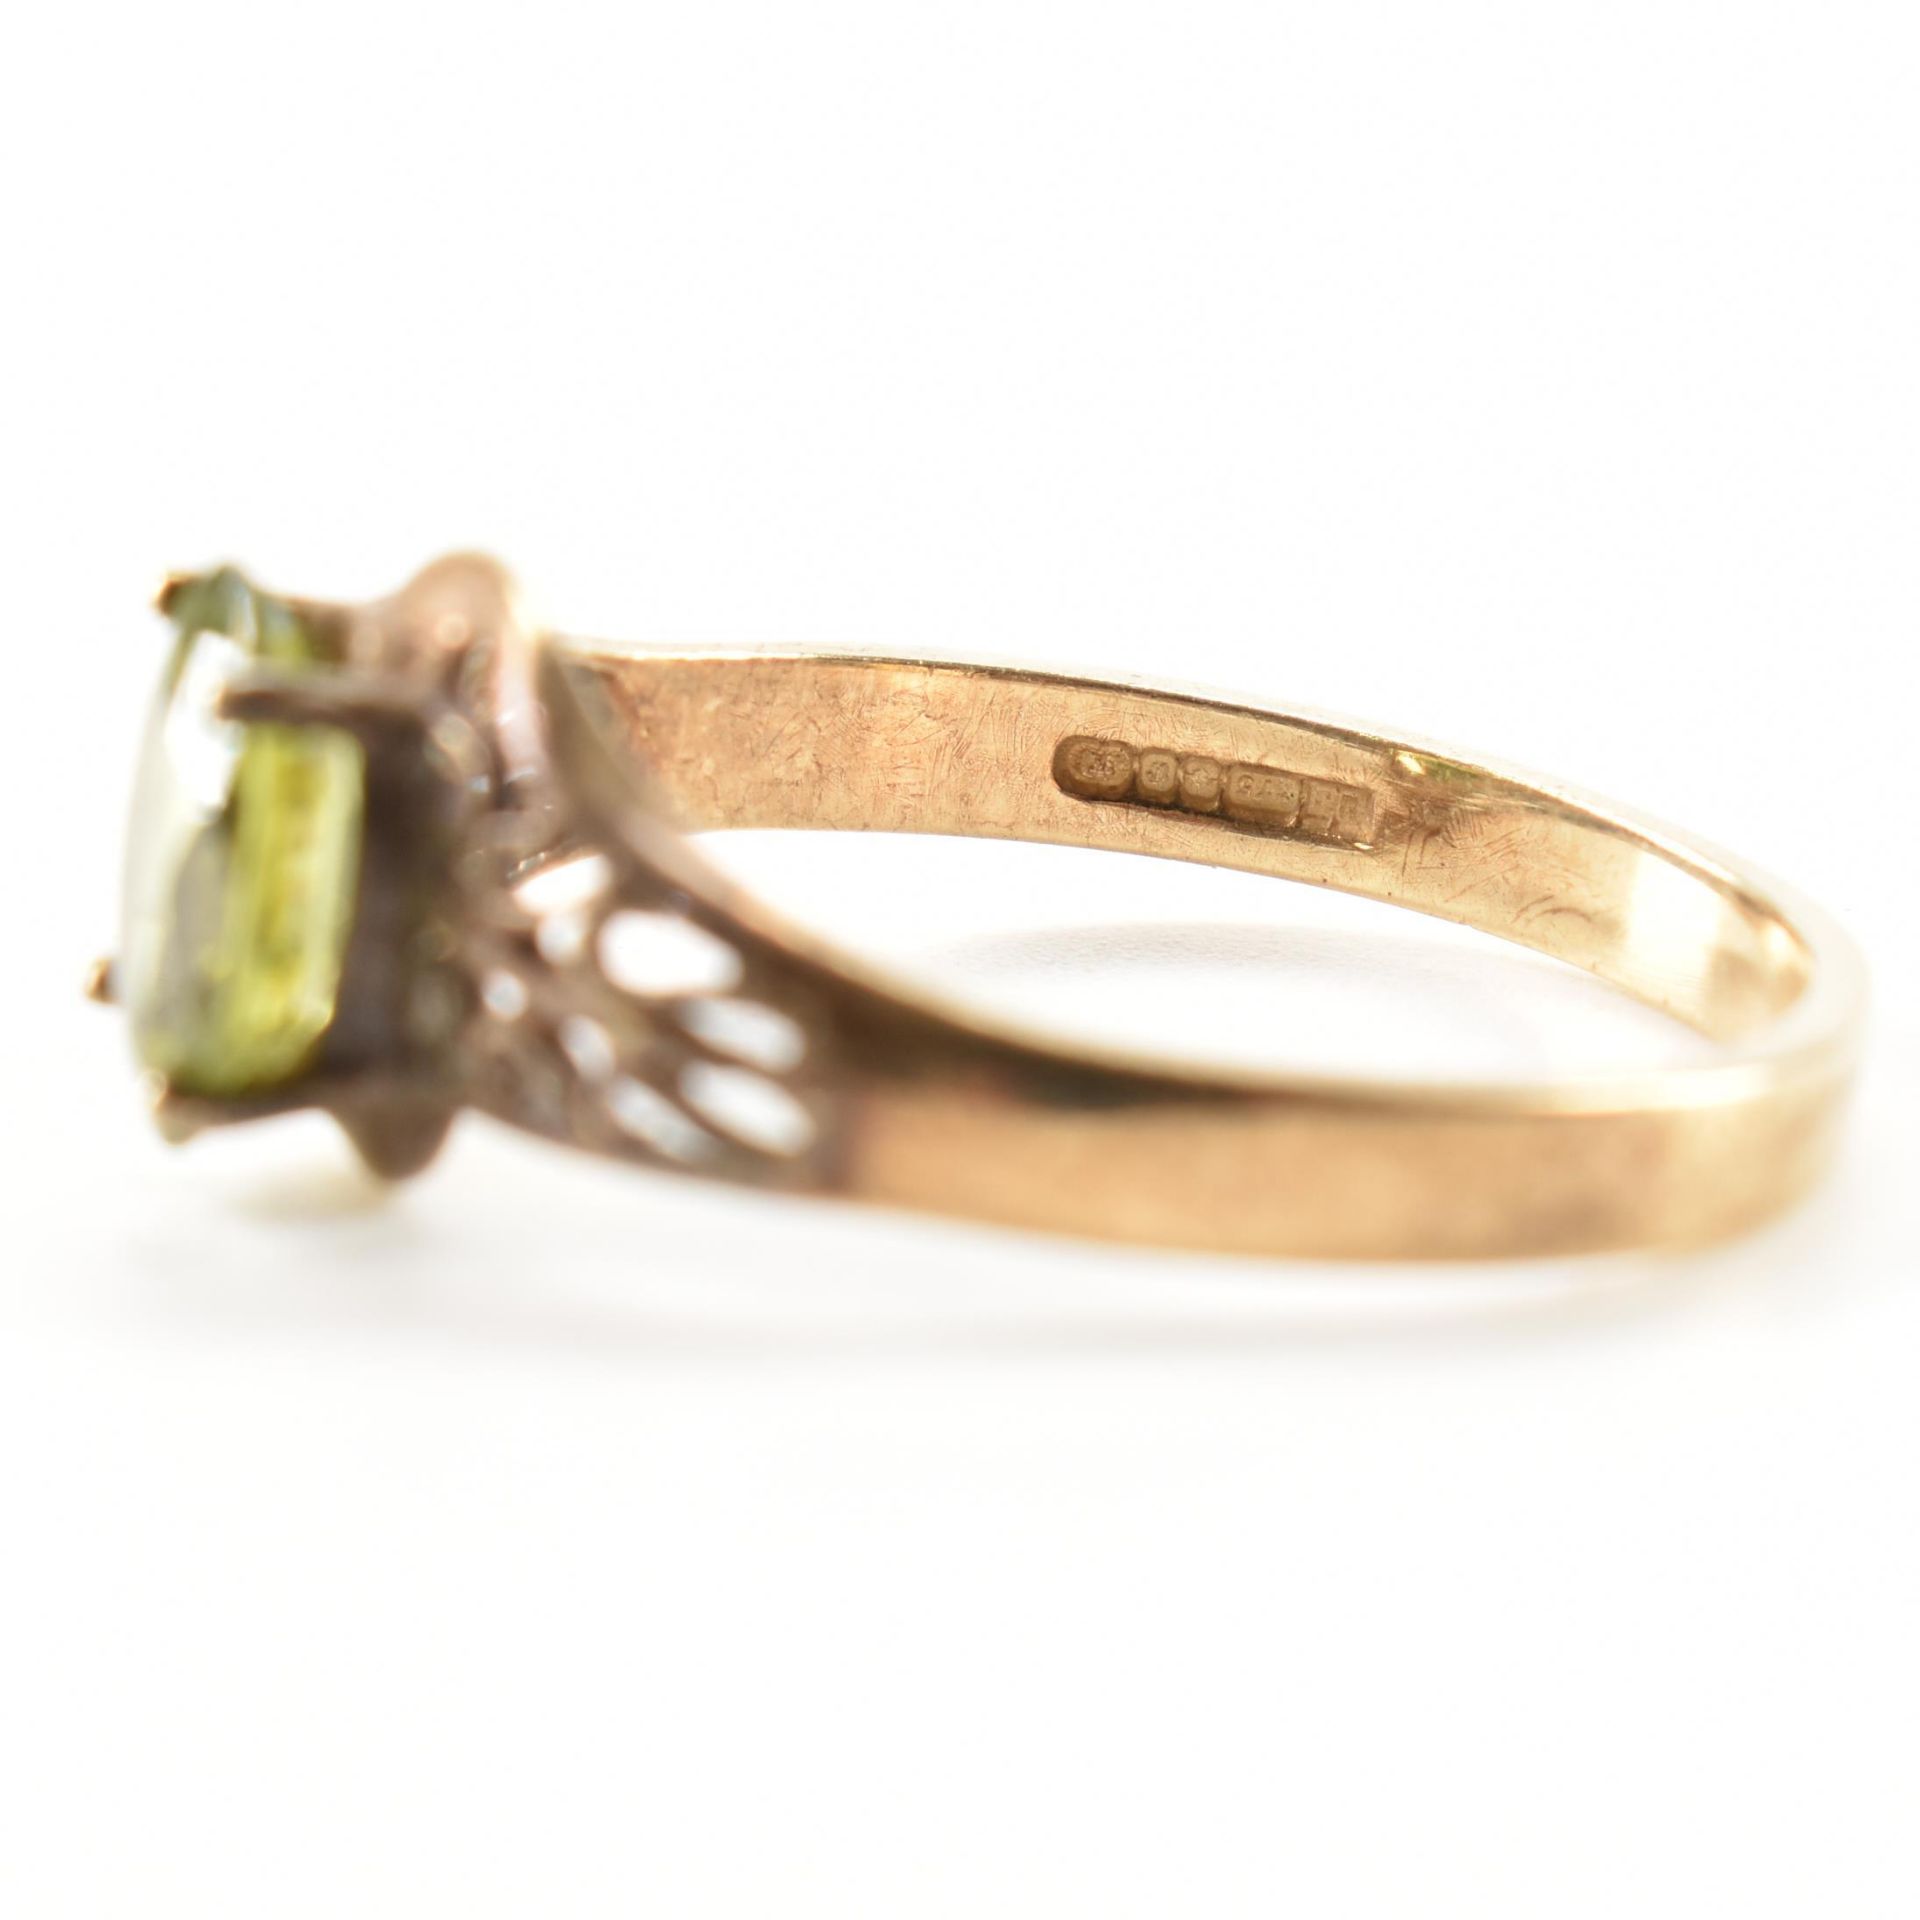 HALLMARKED 9CT GOLD & PERIDOT SOLITAIRE RING - Image 7 of 8